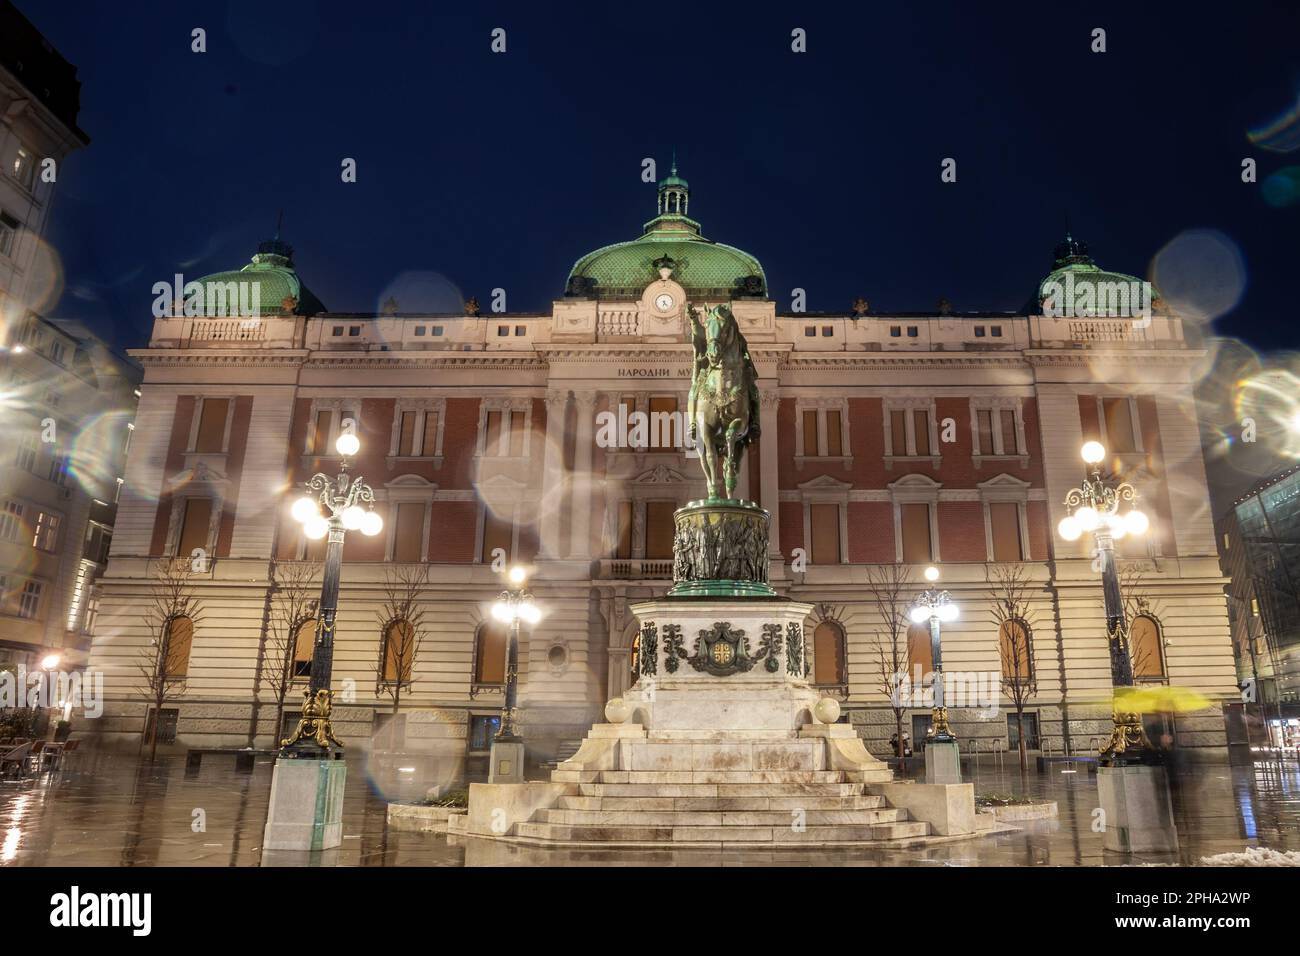 Picture of the national museum of Serbia in belgrade with the statue of Prince Mihailo in front, on Trg Republike, also called republic square at nigh Stock Photo